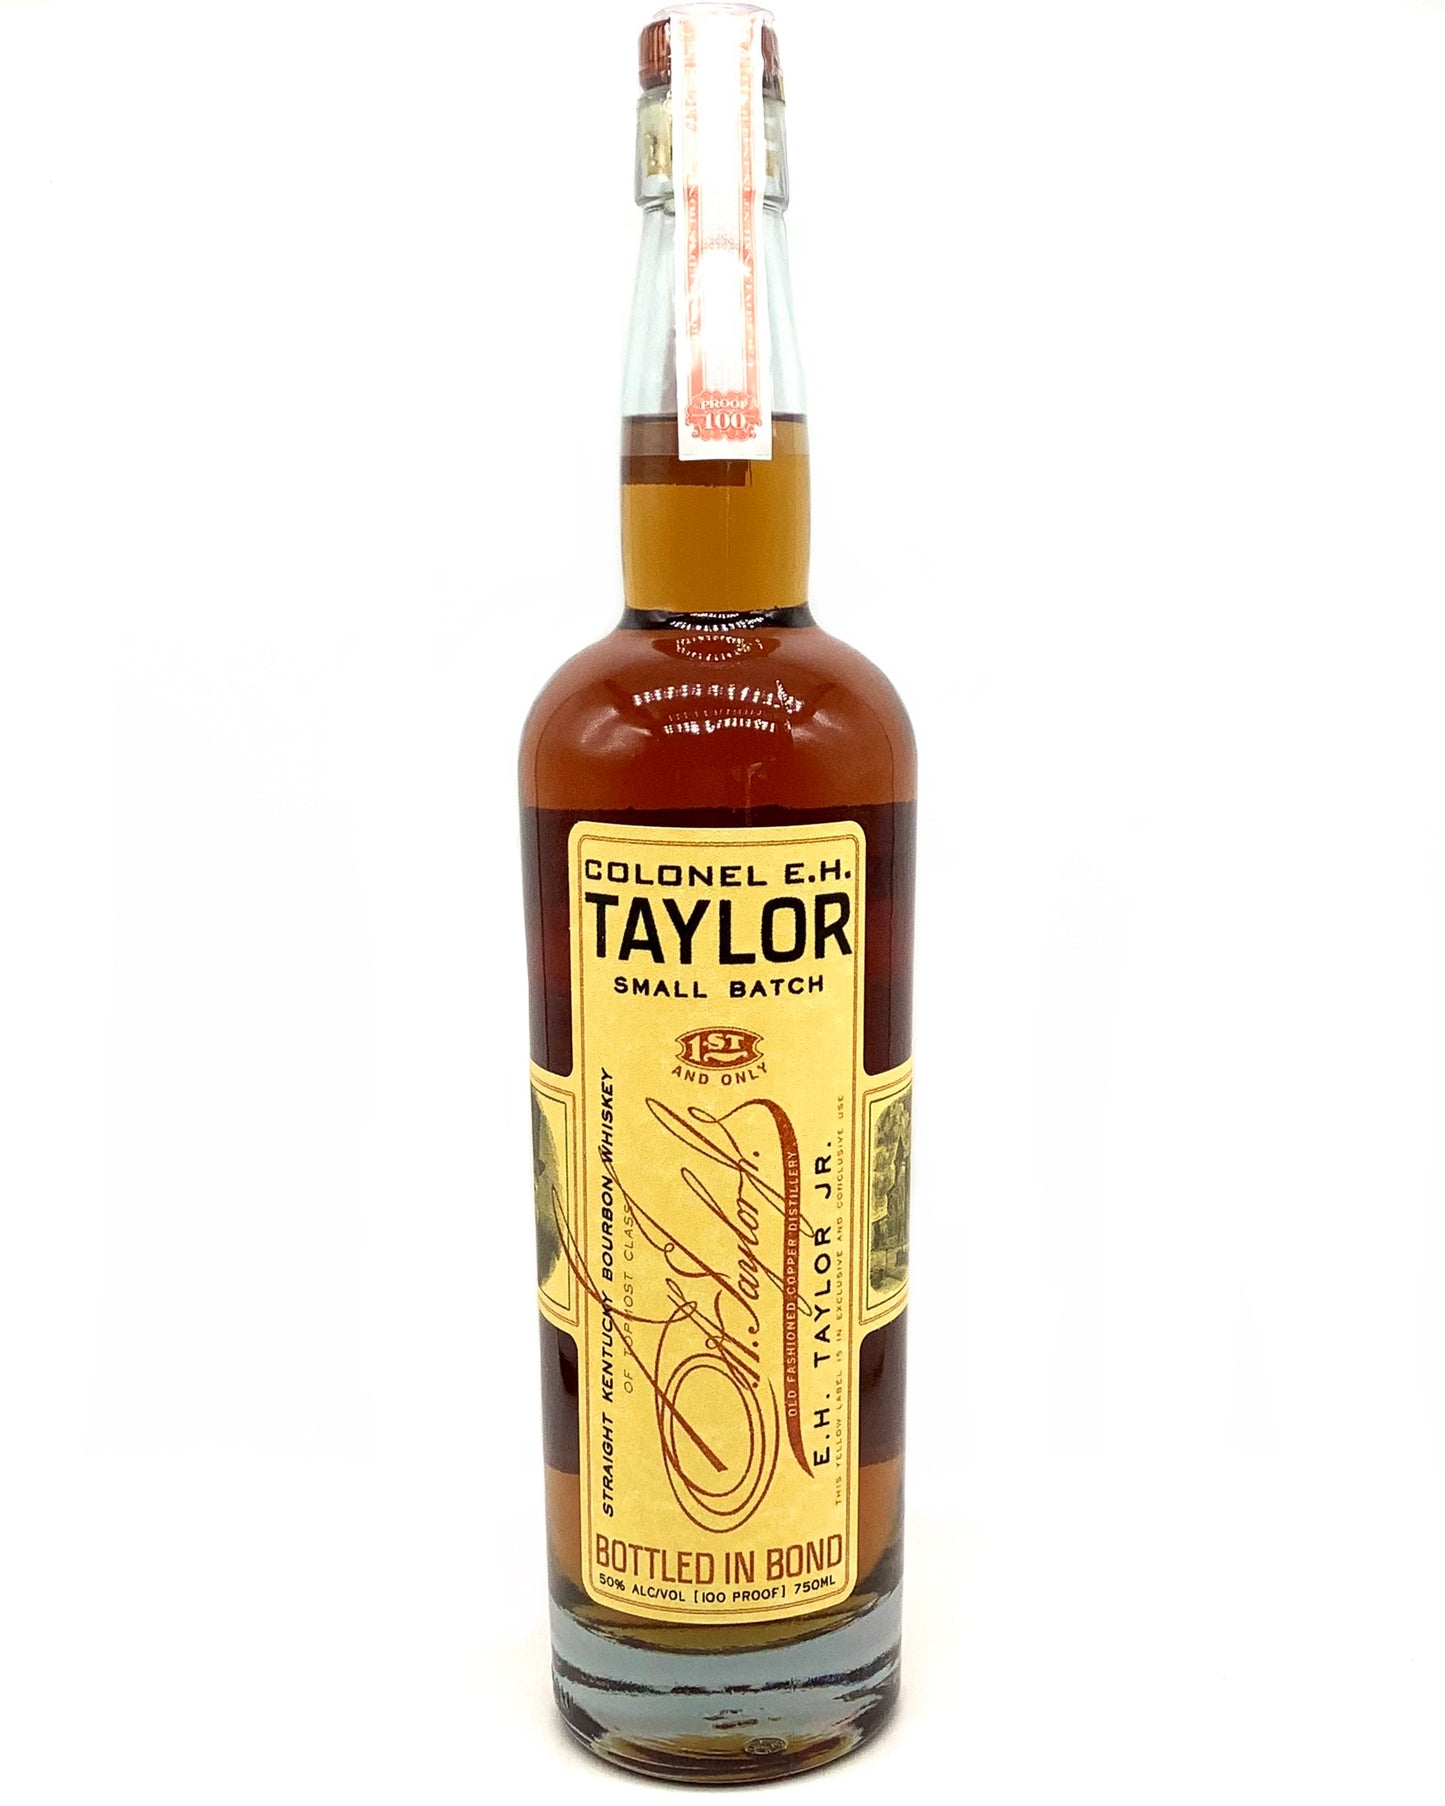 EH Taylor Jr. Small Batch 100 proof